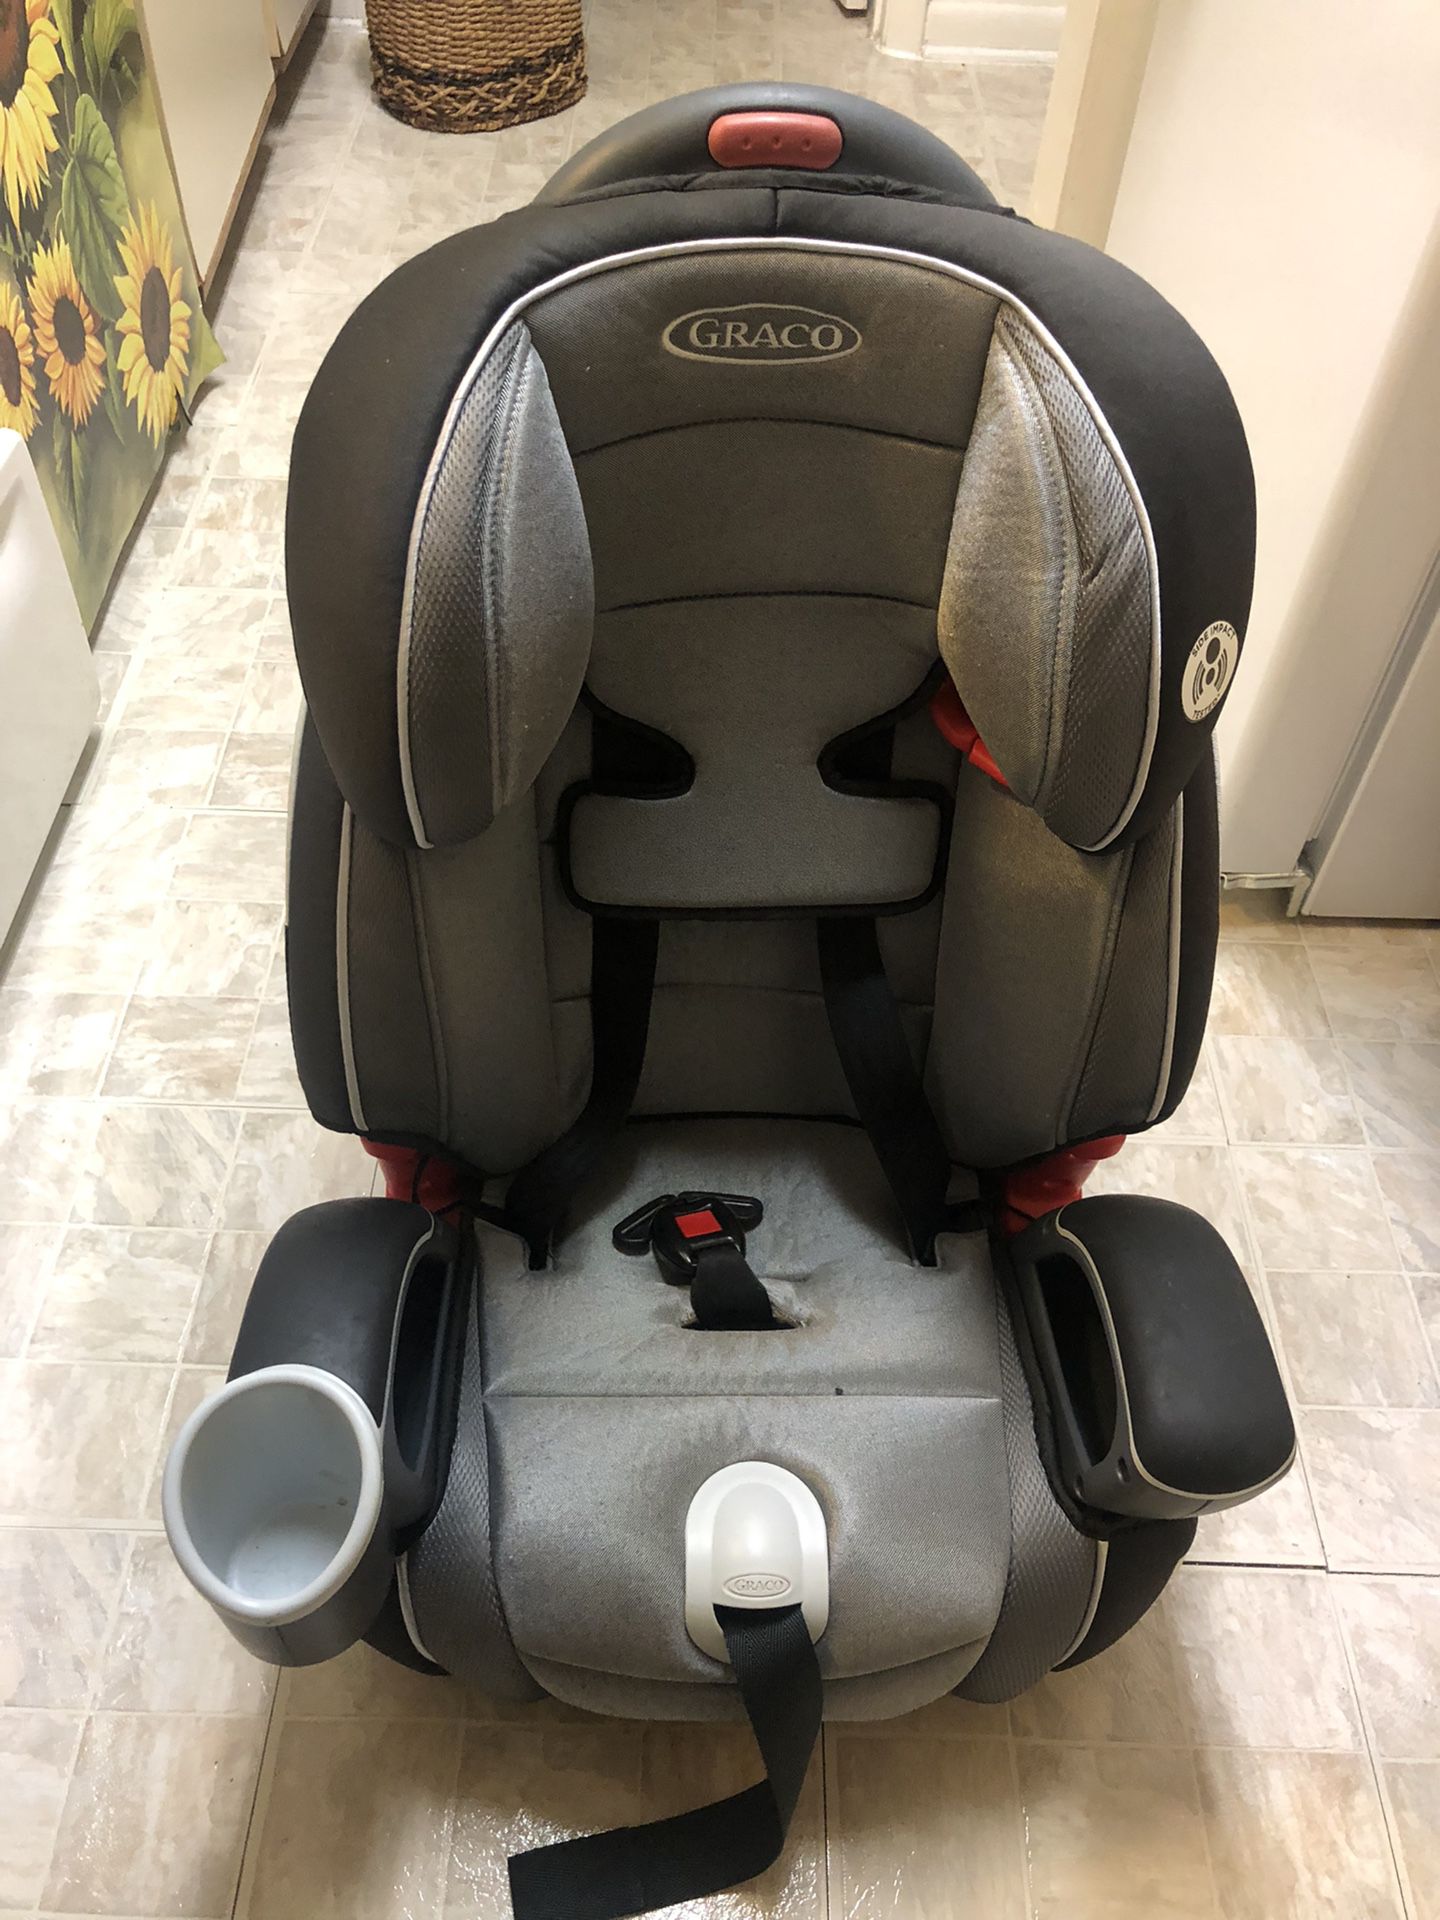 Excellent Condition Graco Booster Seat Holds 100 Pounds Thanks 